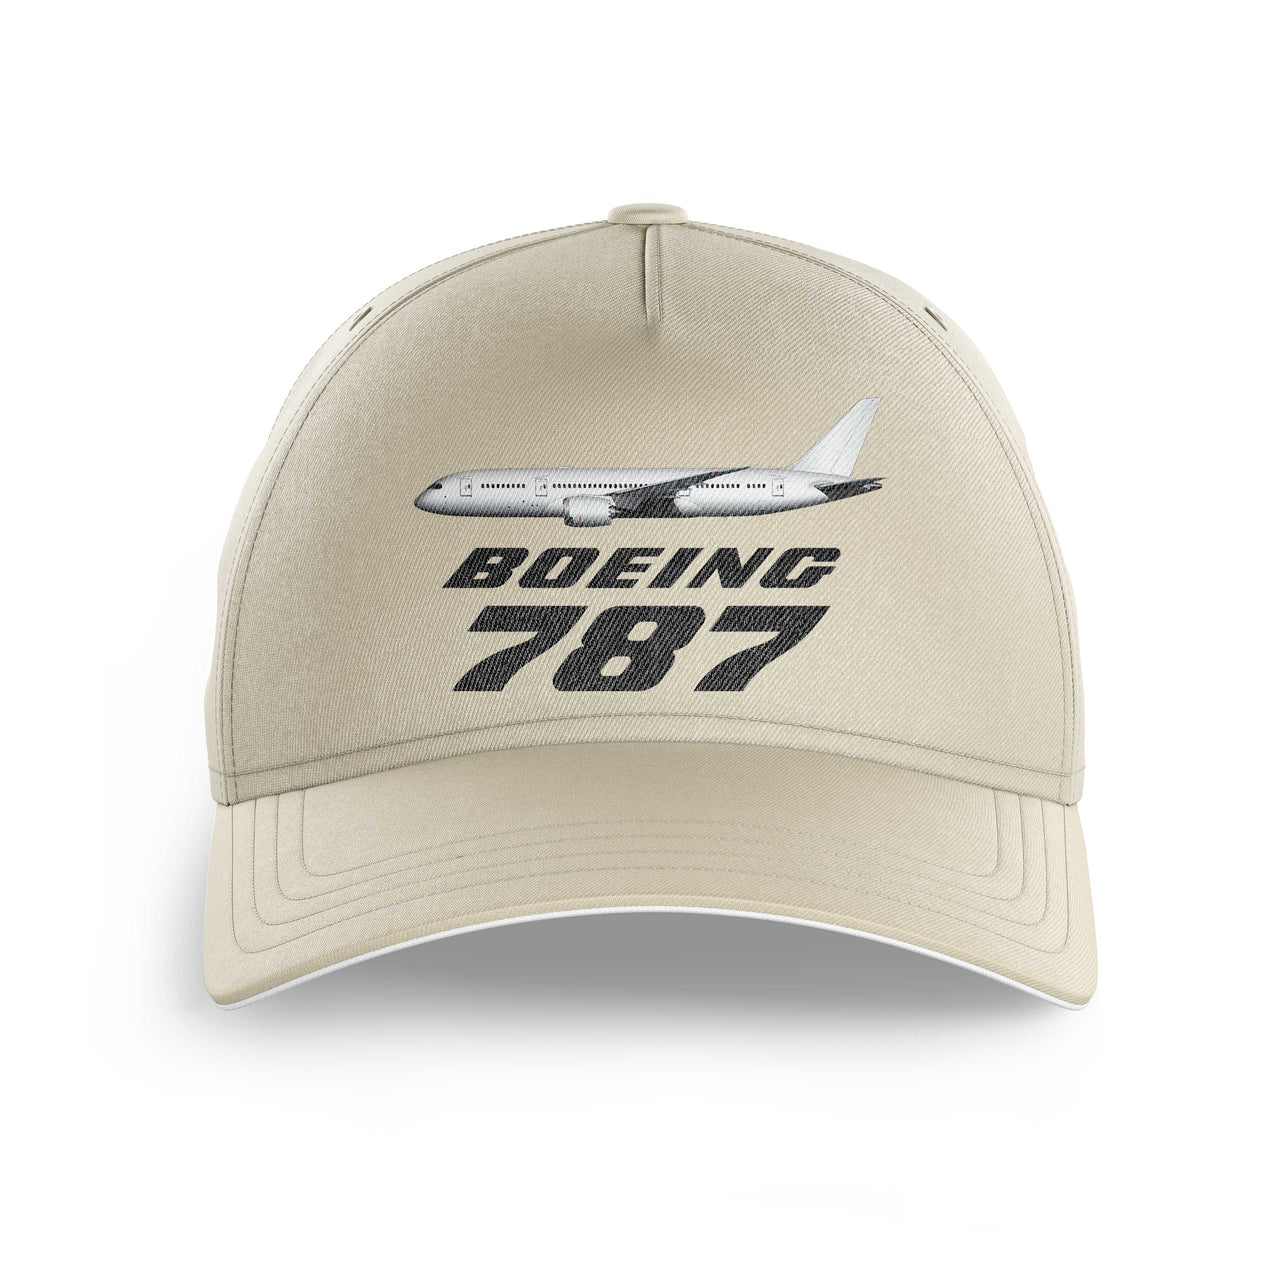 The Boeing 787 Printed Hats